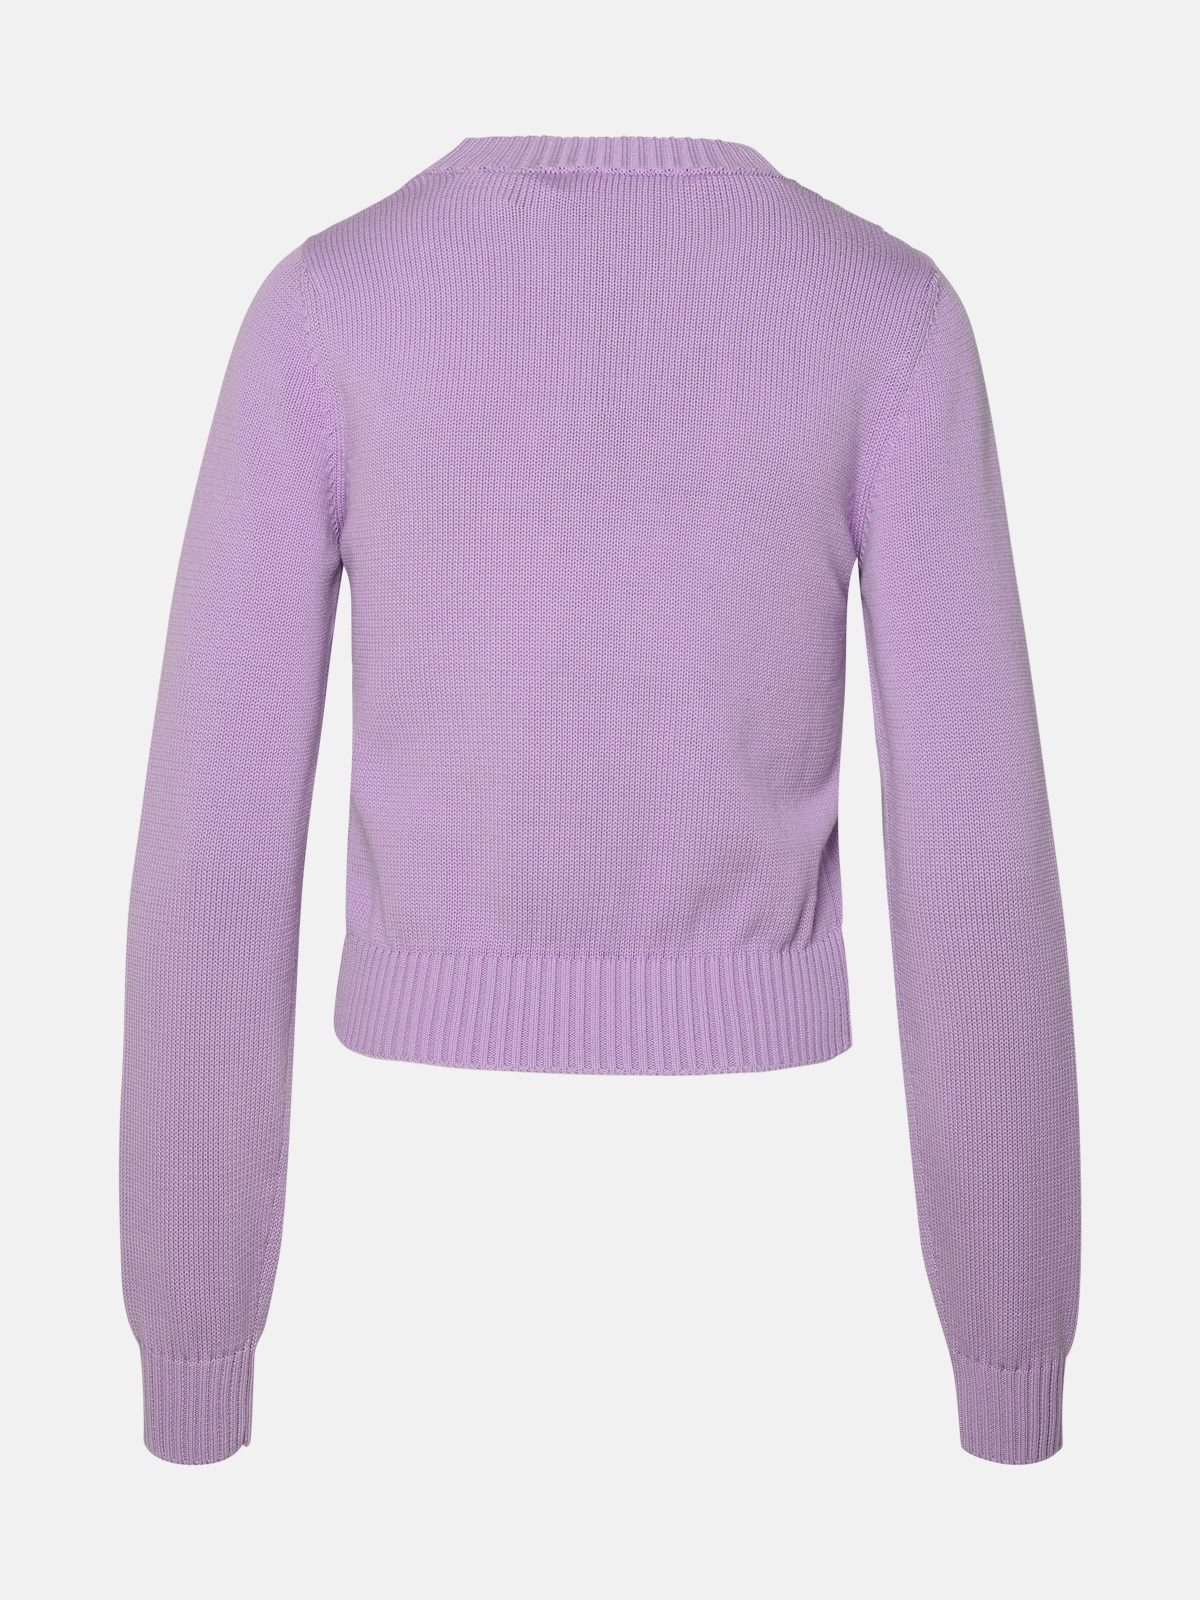 LILAC COTTON SWEATER - 3